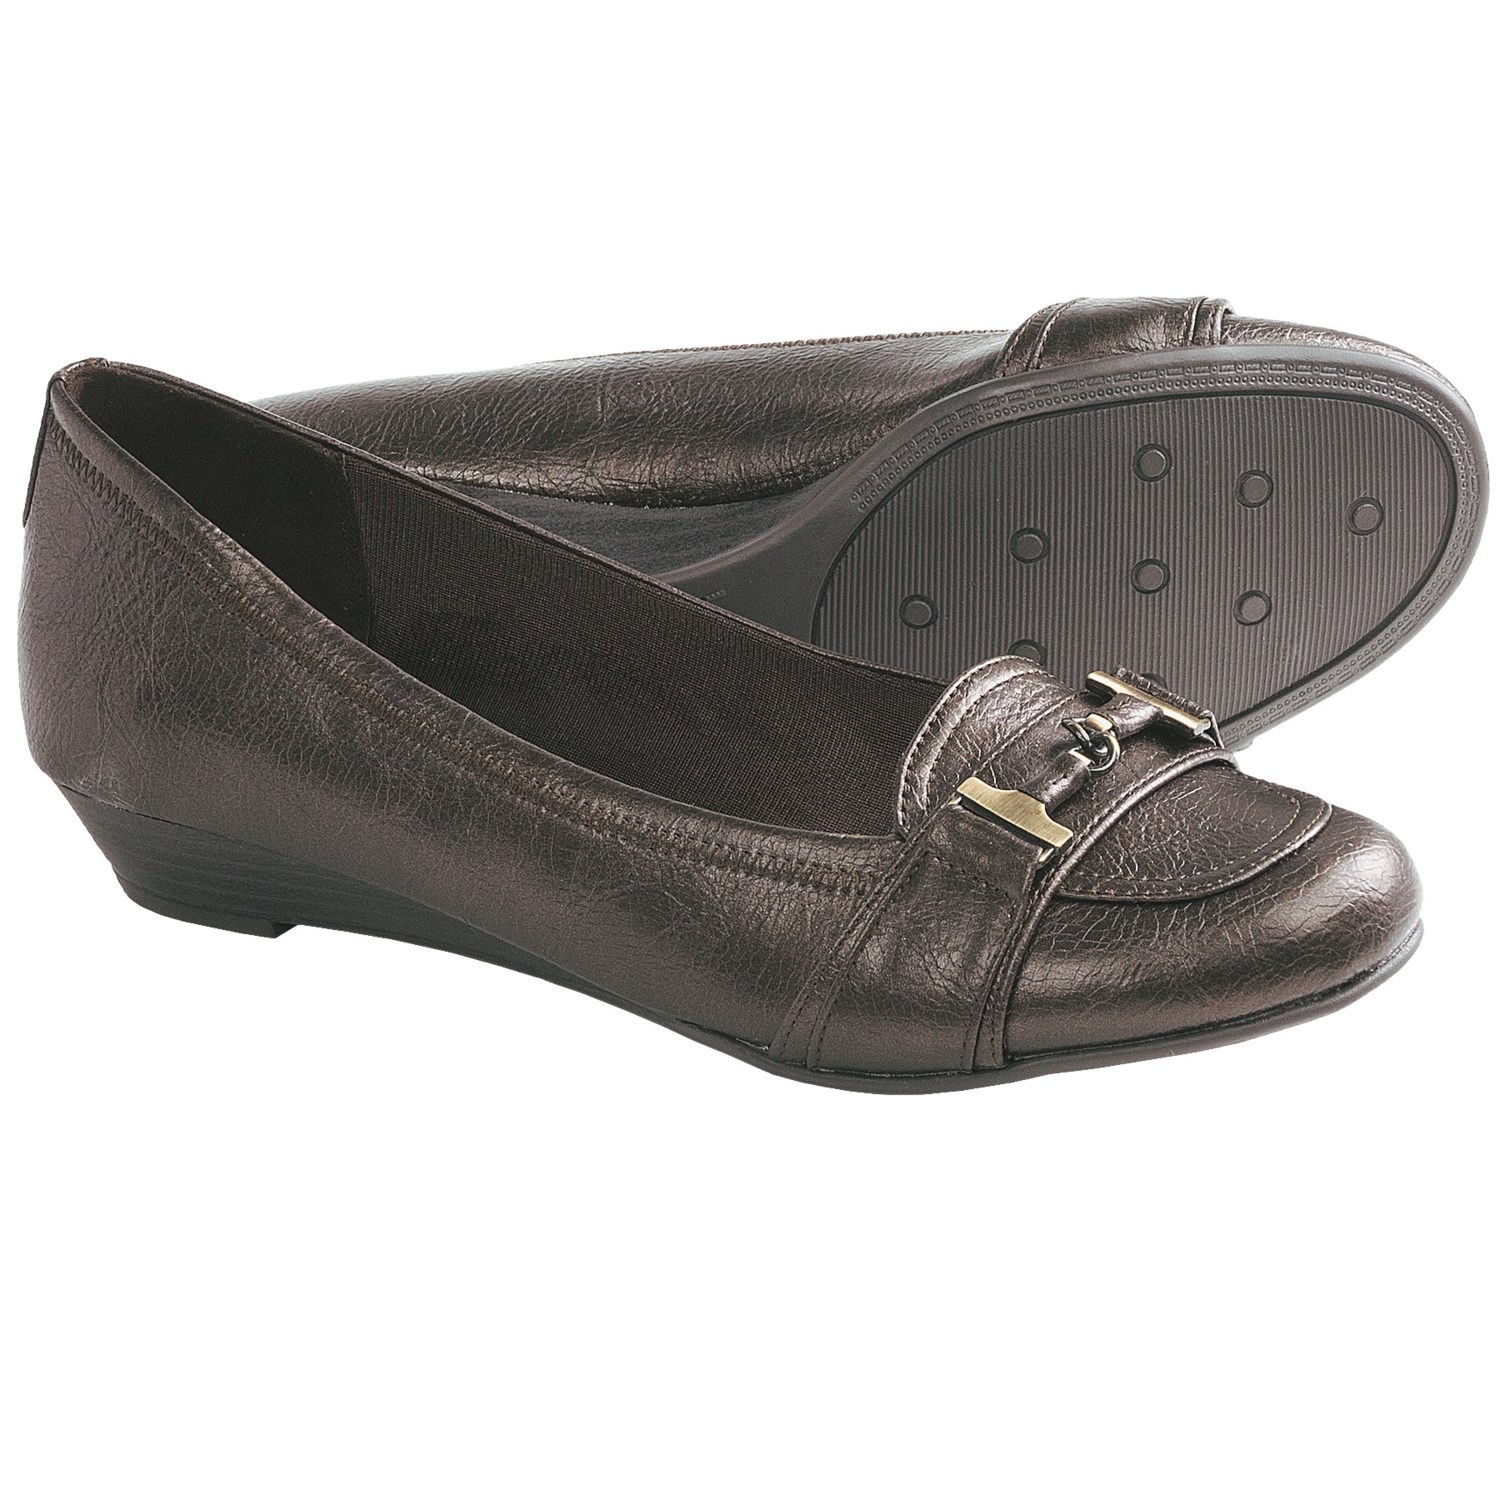 Life Stride Marco Shoes (For Women) in Dark Bronze